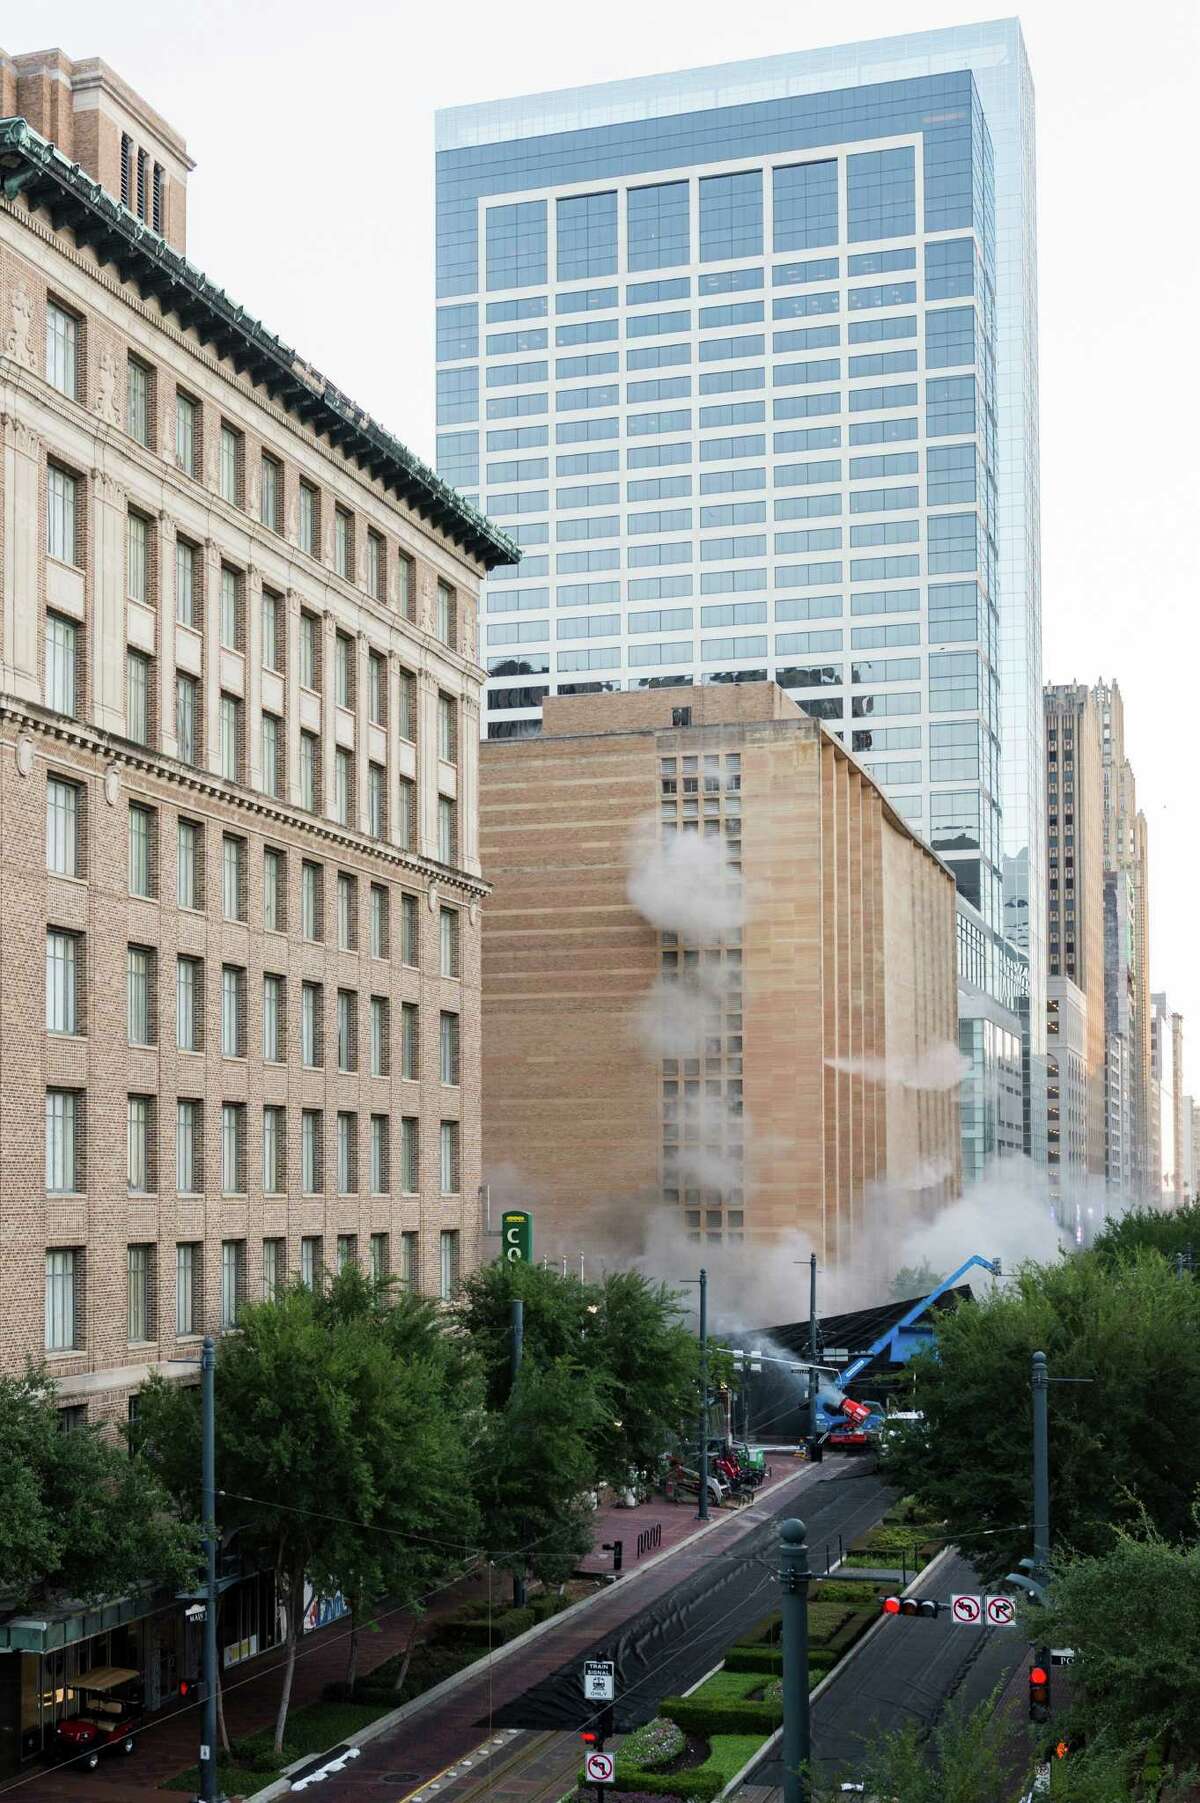 A series of explosive charges brings down the landmark former Macy's department store building in downtown Houston on Sunday, Sept. 22, 2013. Many Houstonians remember the store as Foley's, a homegrown retail chain that started downtown in 1900. As the store grew, it relocated and eventually moved into the building at 1110 Main in 1947. It was converted to Macy's in 2006 and operated at the site until closing in March. The 10-story, 791,000-square-foot building was reduced to rubble just after sunrise to make way for a still undisclosed new development. ( Smiley N. Pool / Houston Chronicle )